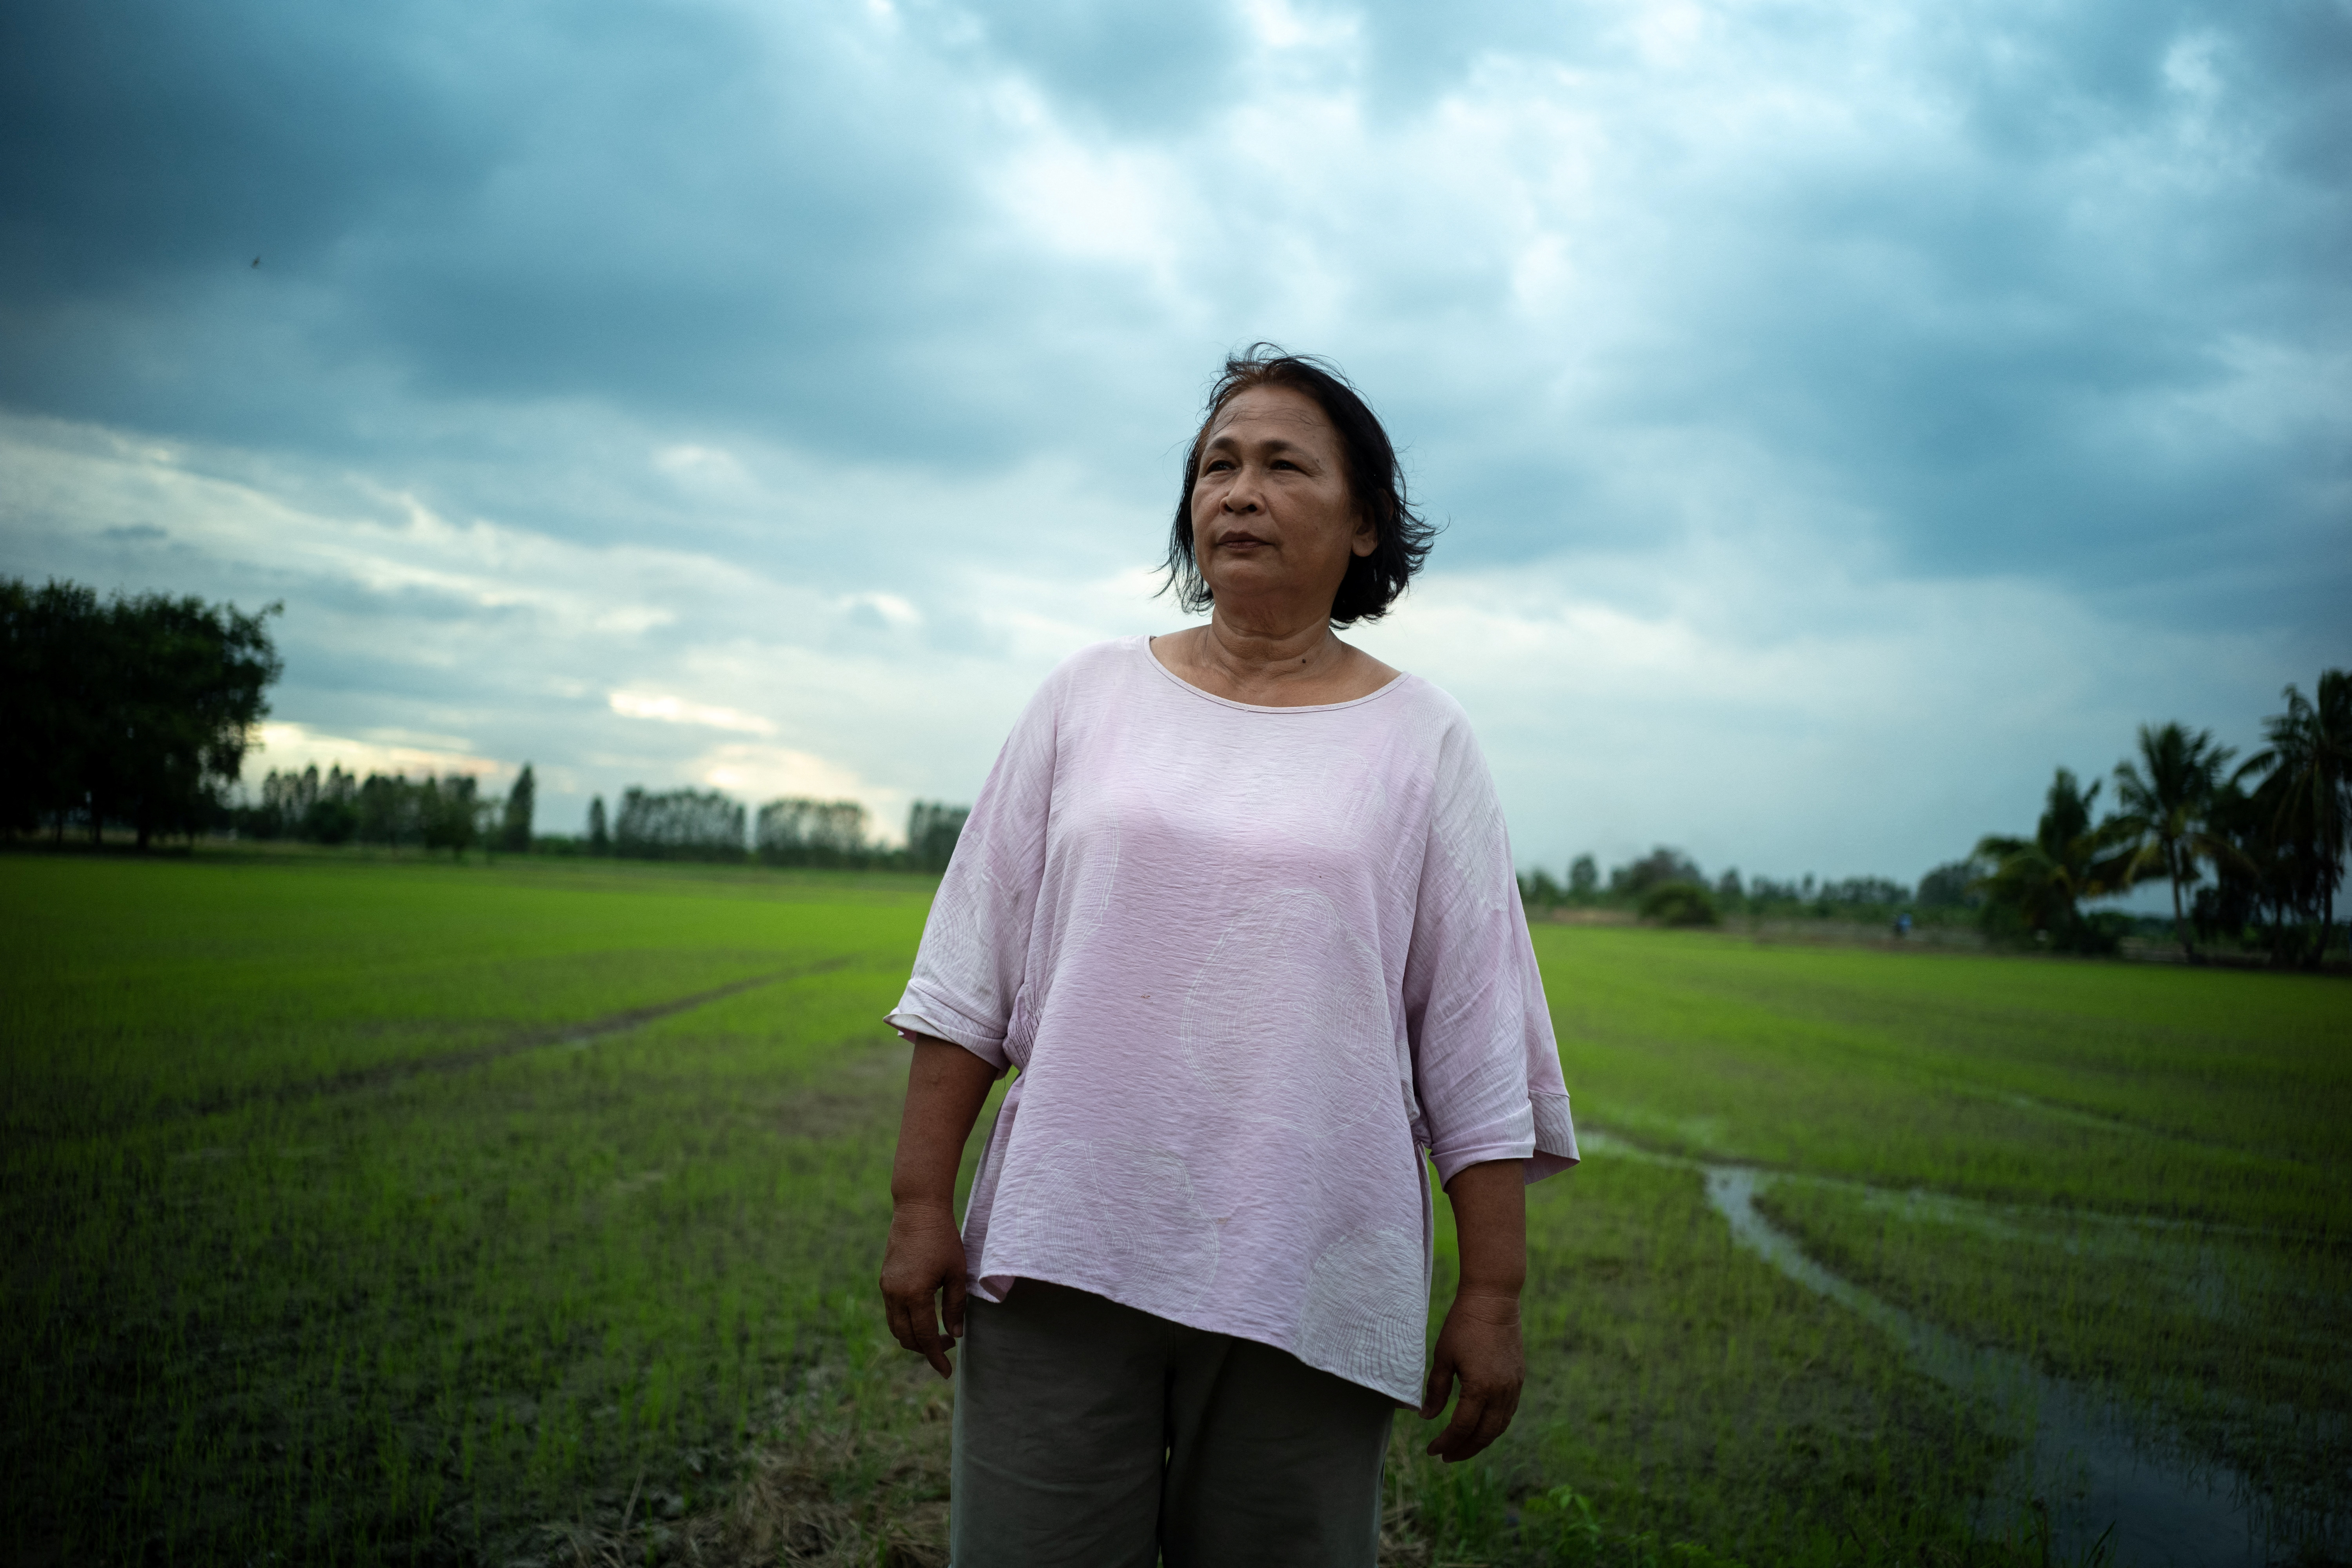 Thai rice farmers choose risky path, trapped between debt and drought